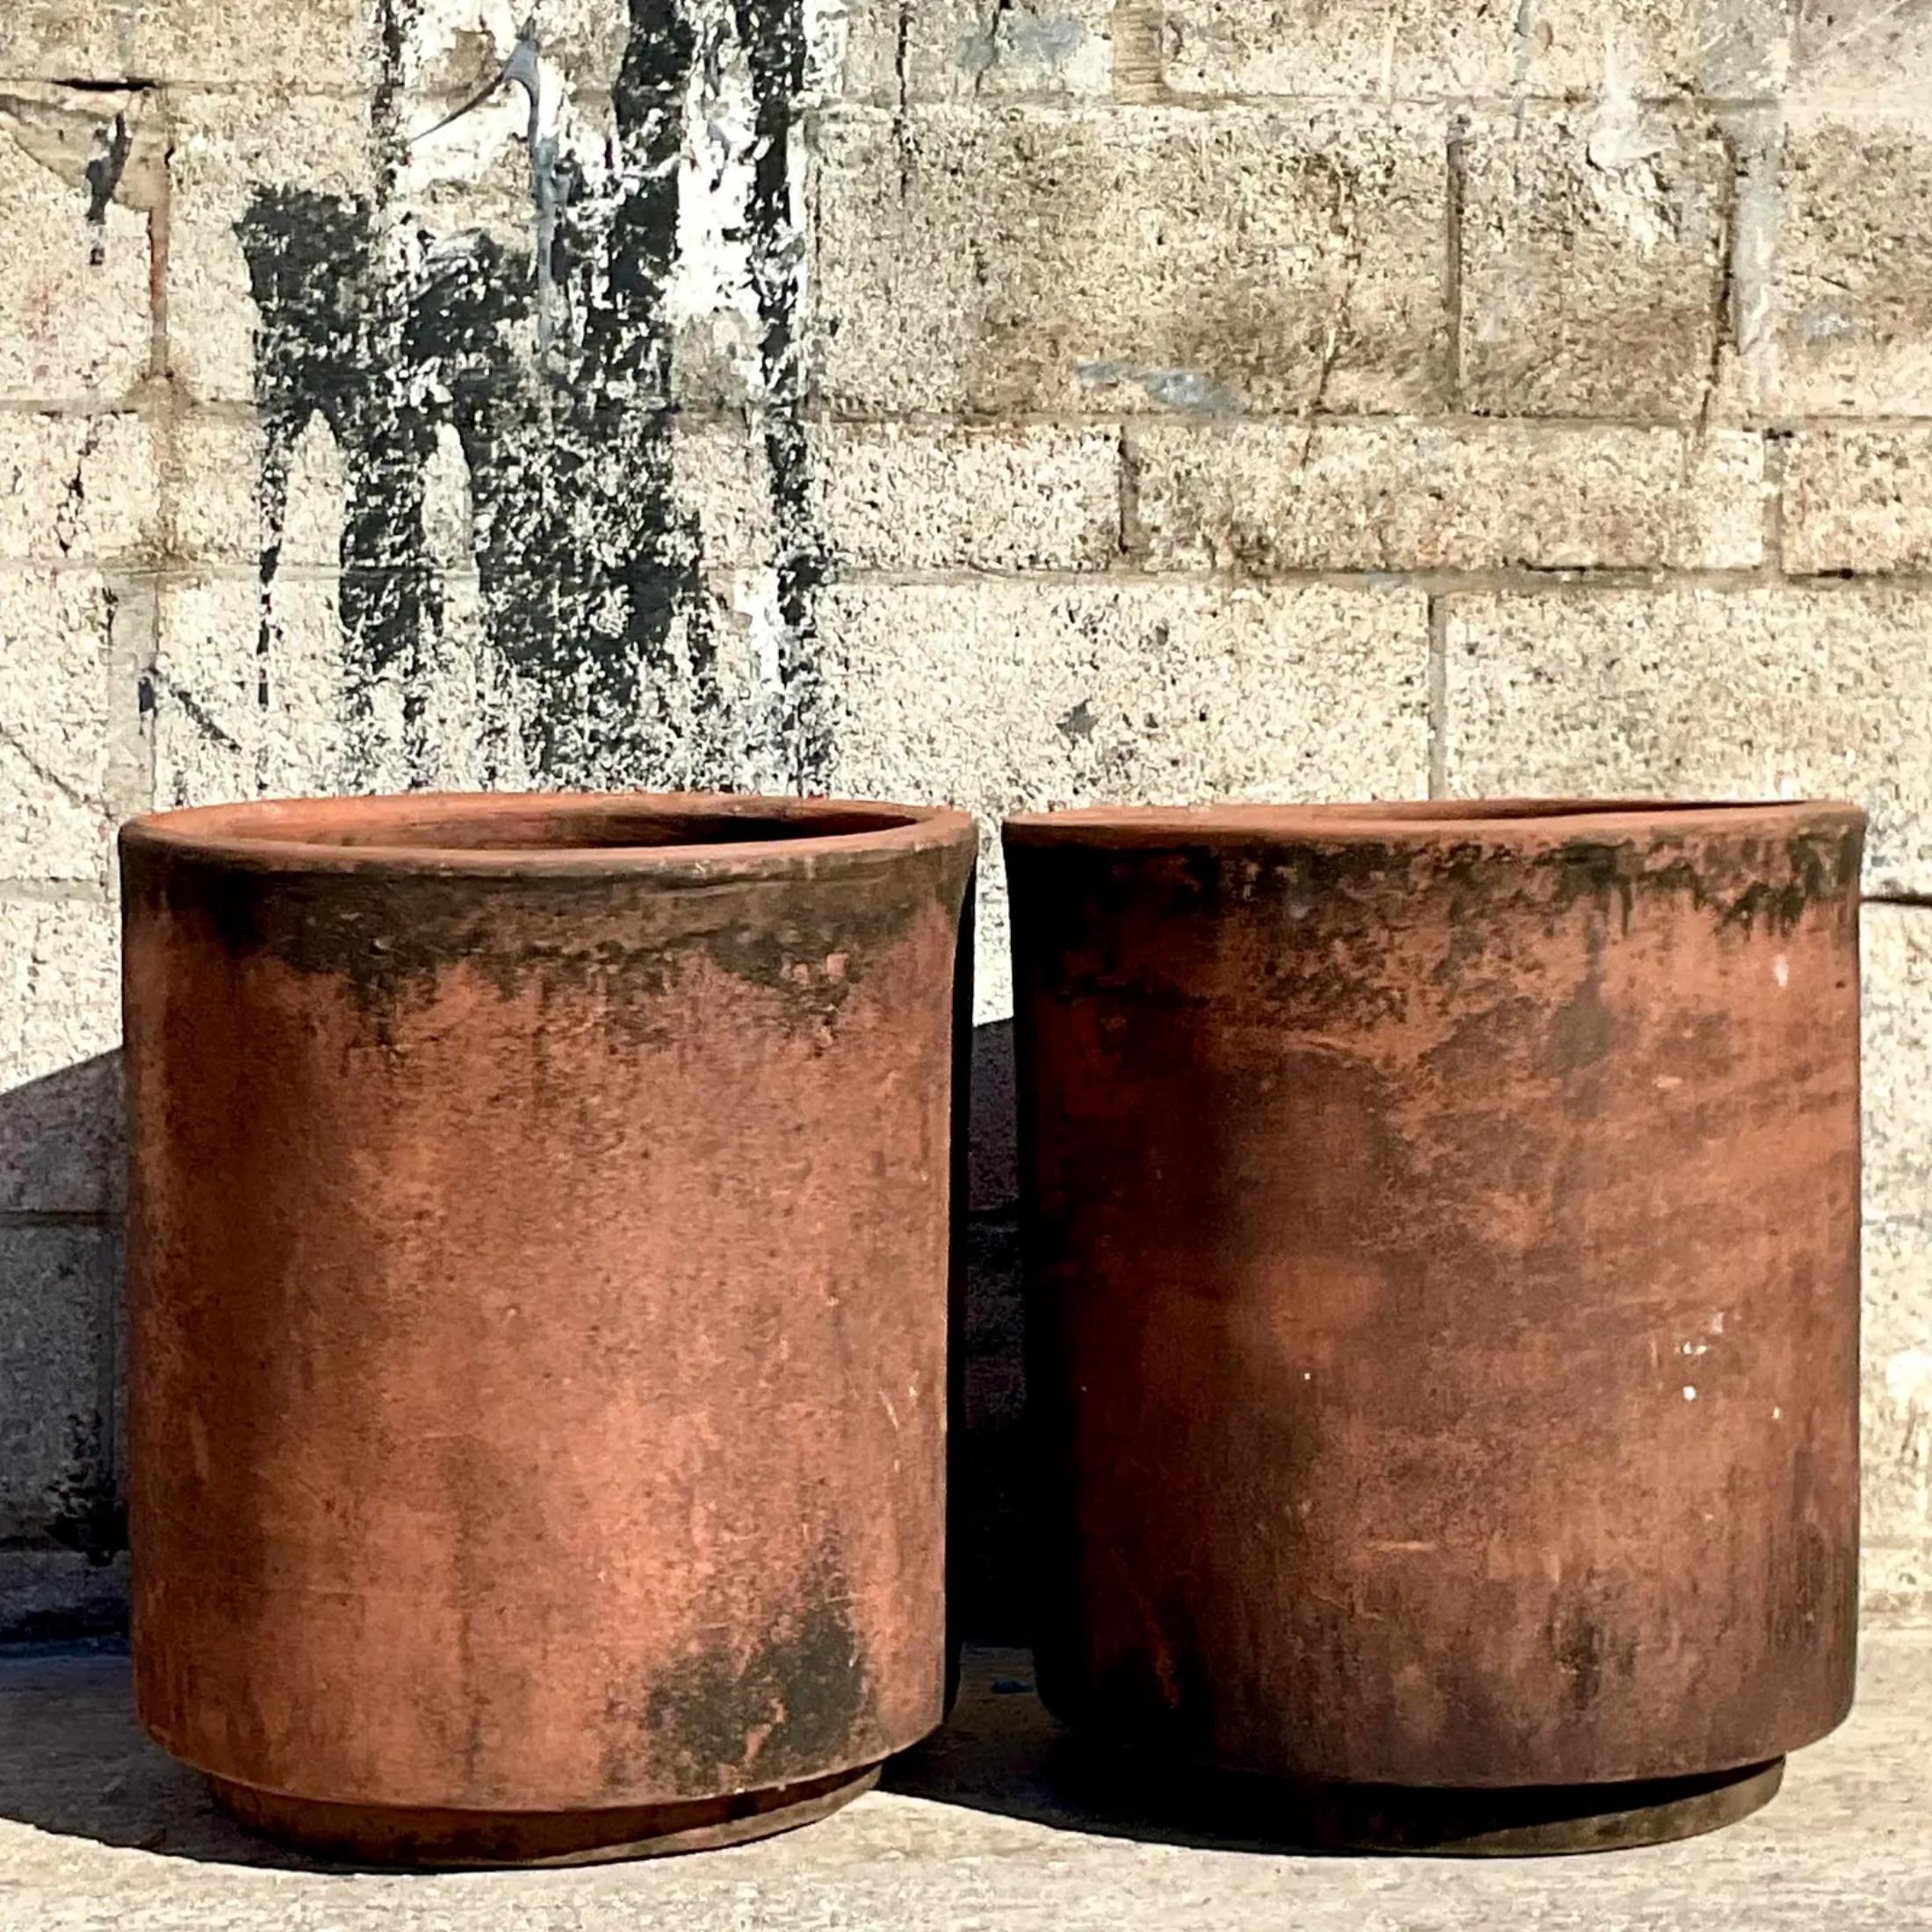 The fabulous vintage terracotta cylinder planters that comes in a pair. Acquired at a Palm Beach estate.

